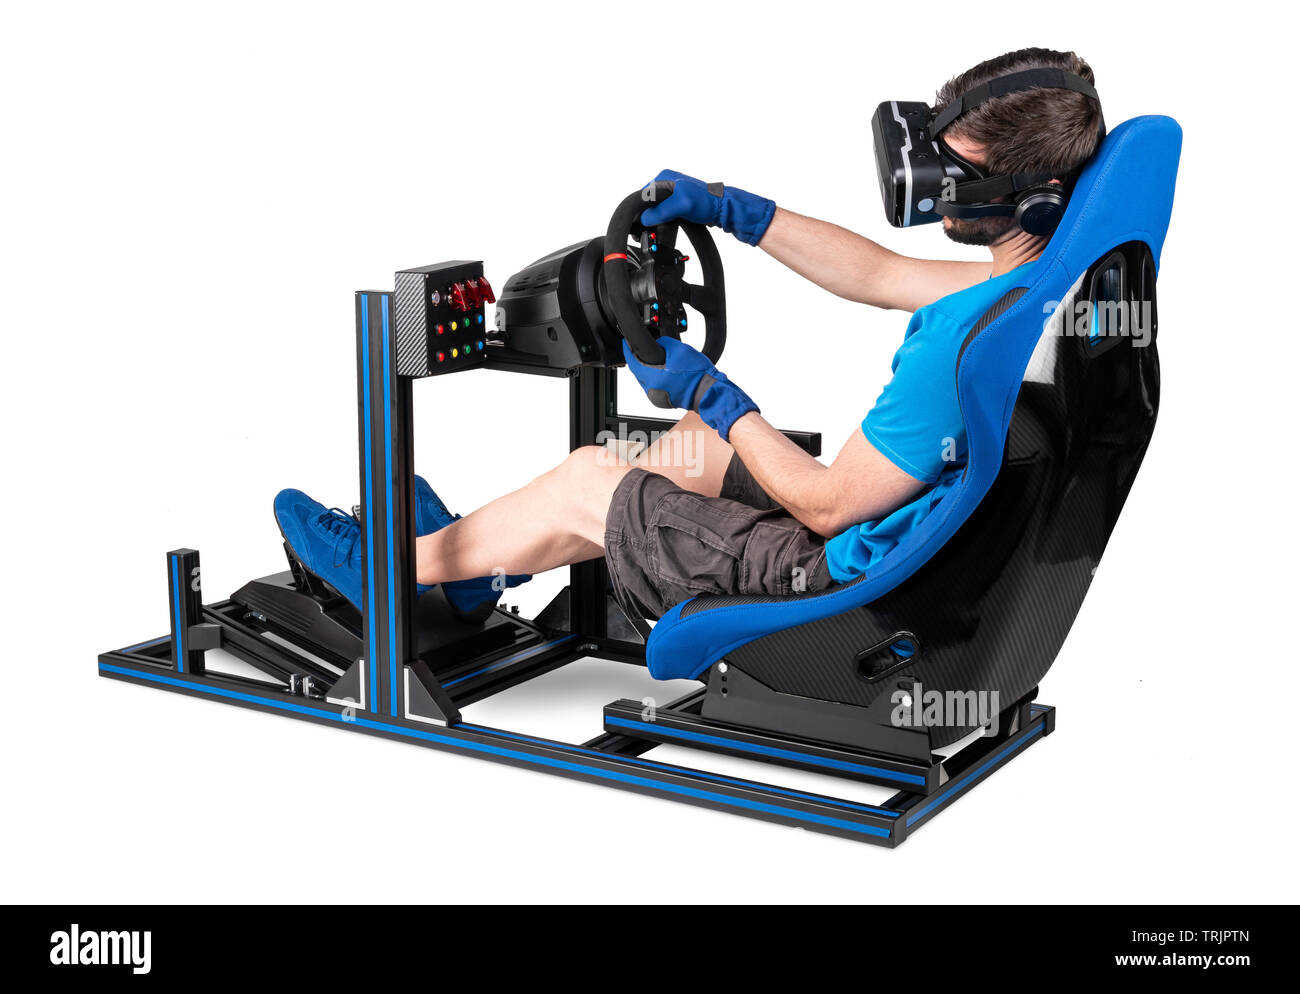 gamer in blue tshirt with VR virtual reality glasses training on simracing aluminum simulator rig for video game racing. Motorsport car bucket seat st Stock Photo